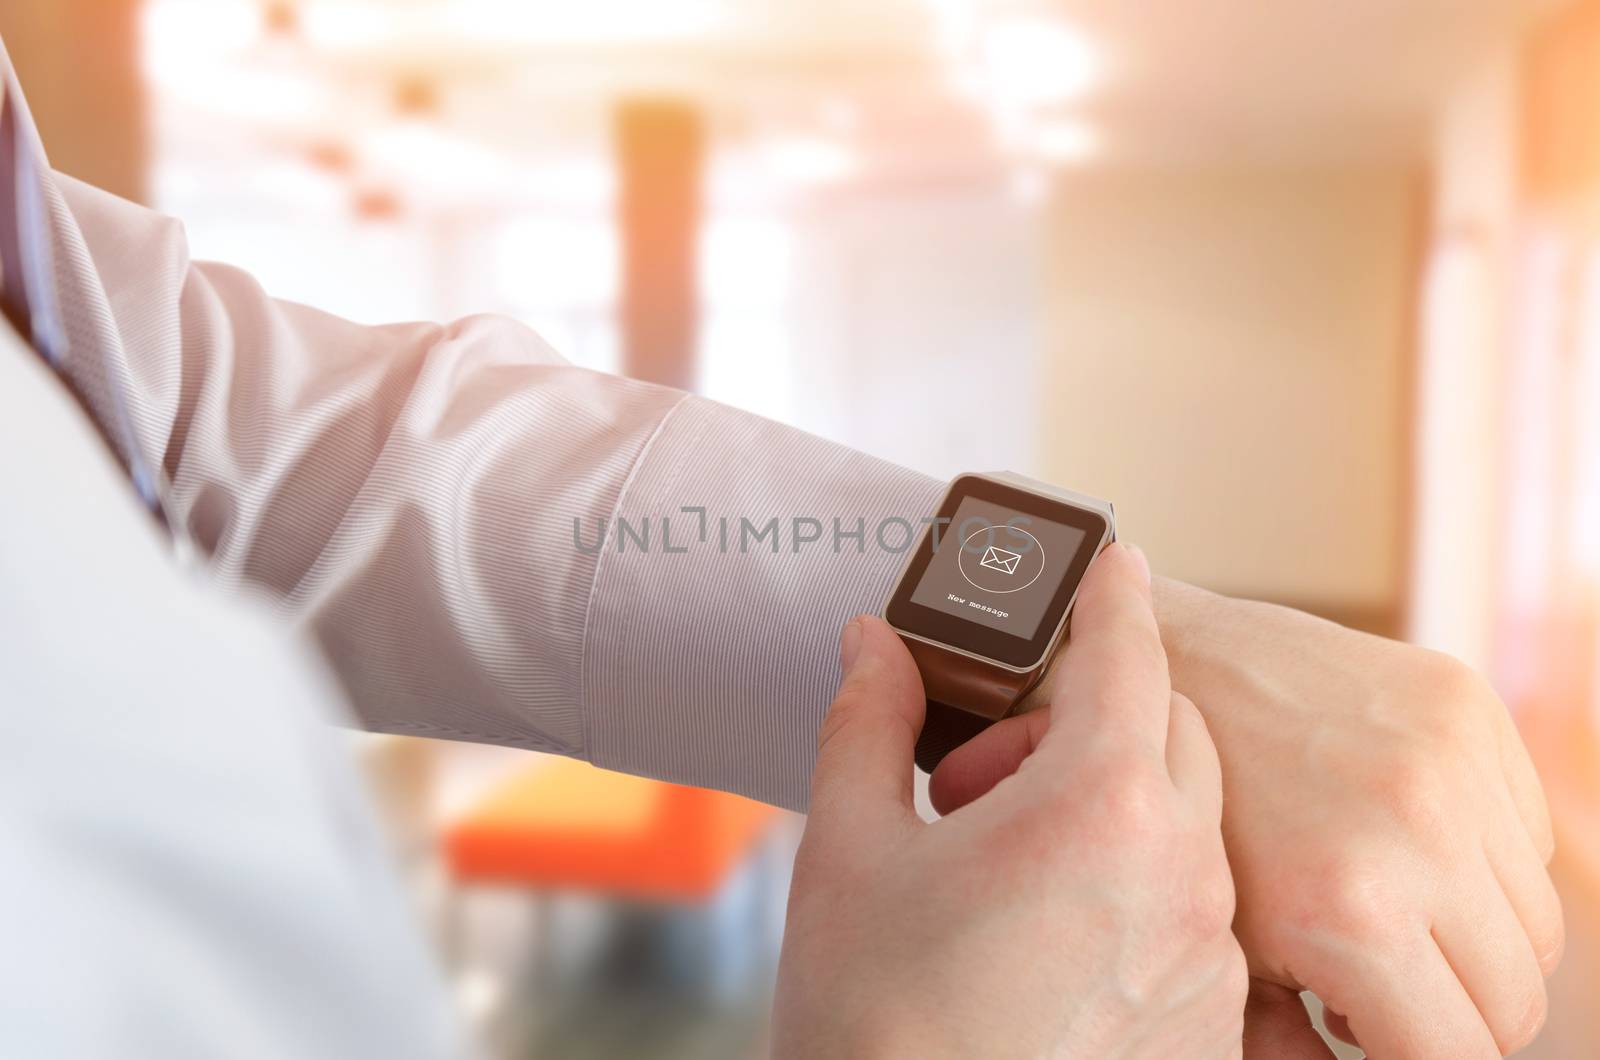 Man using smartwatch with e-mail notifier by simpson33